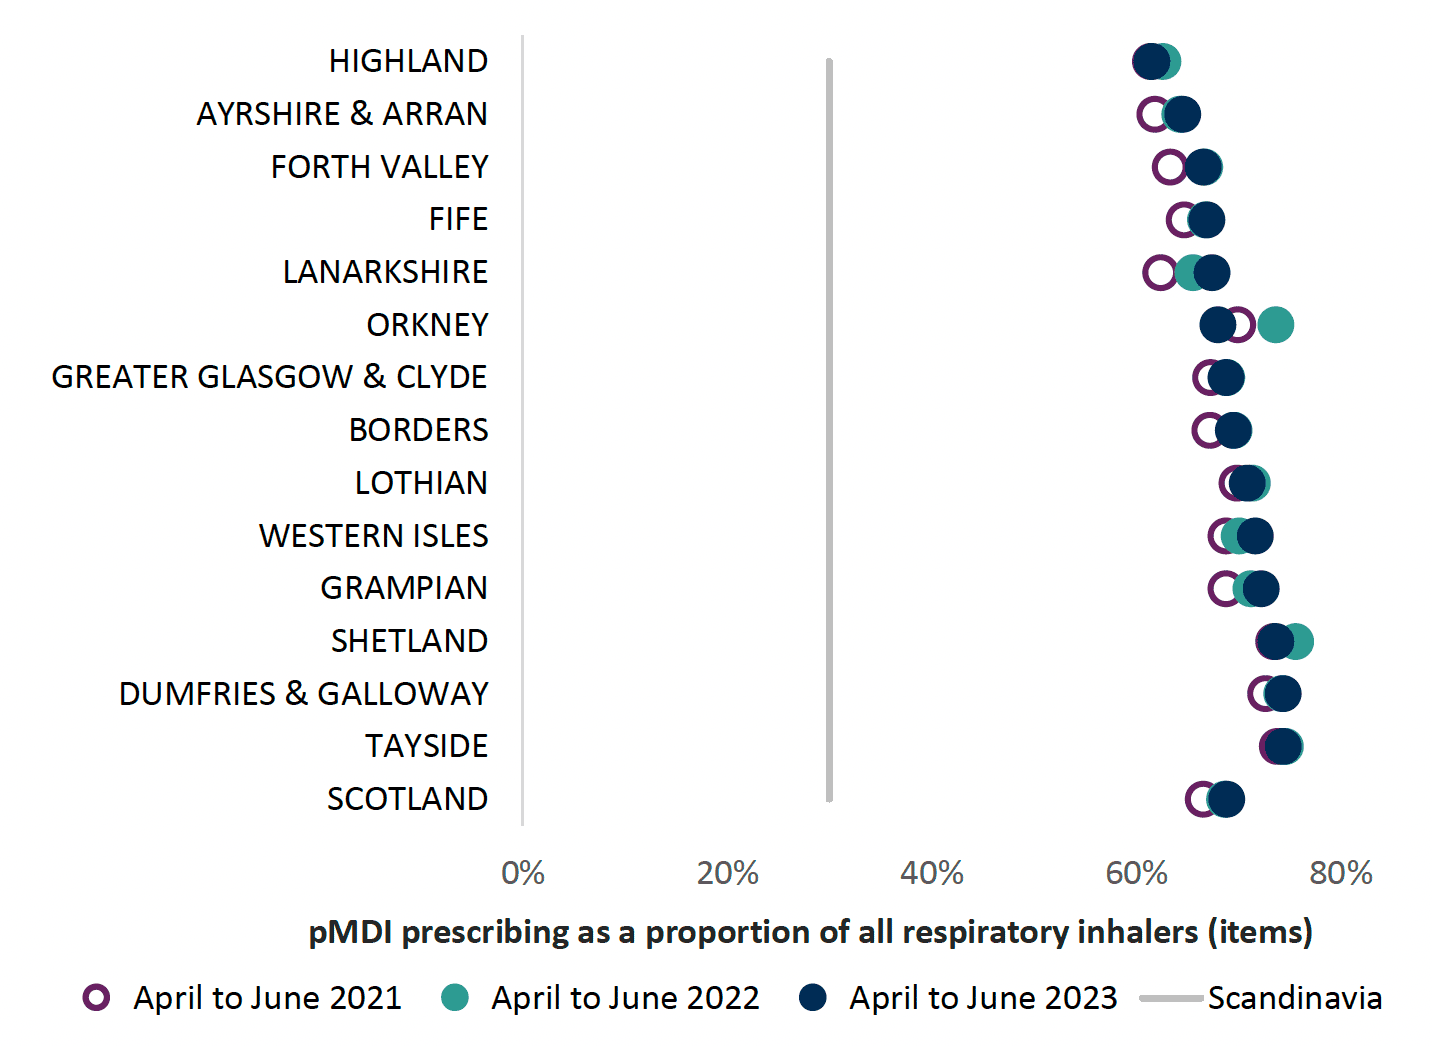 Chart showing variance in proportion of pMDIs versus all inhalers across all health boards and Scotland from 2021 to 2023, with the Scandinavian level of pMDI prescribing shown at 30% as a comparator. Overall Scotland trend is increasing